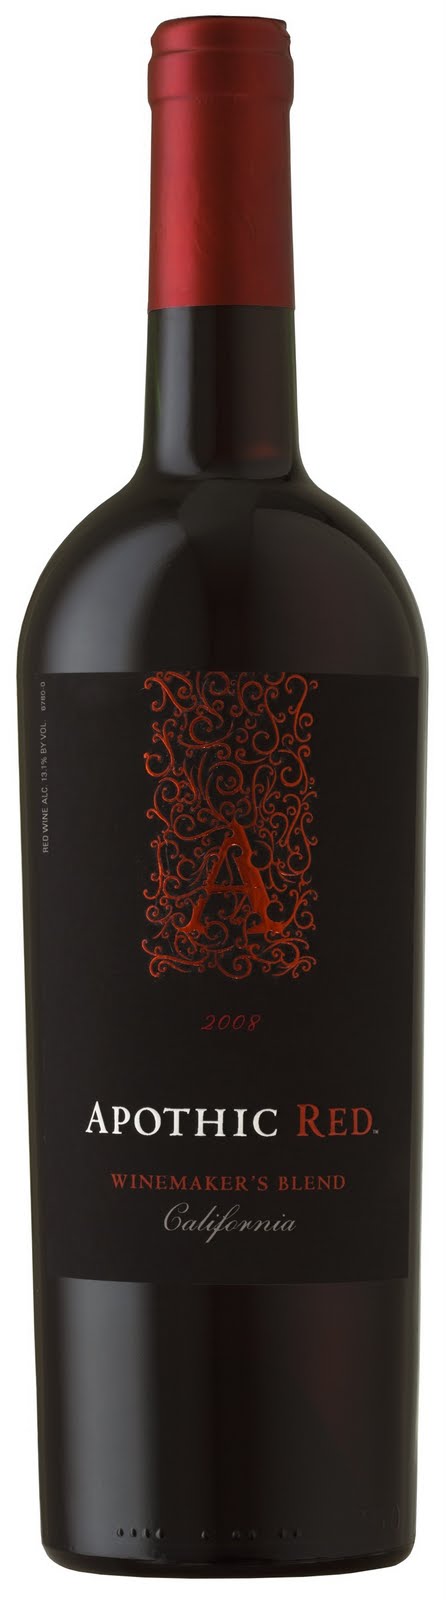 2016 Apothic Red Inferno Red Blend California - click image for full description